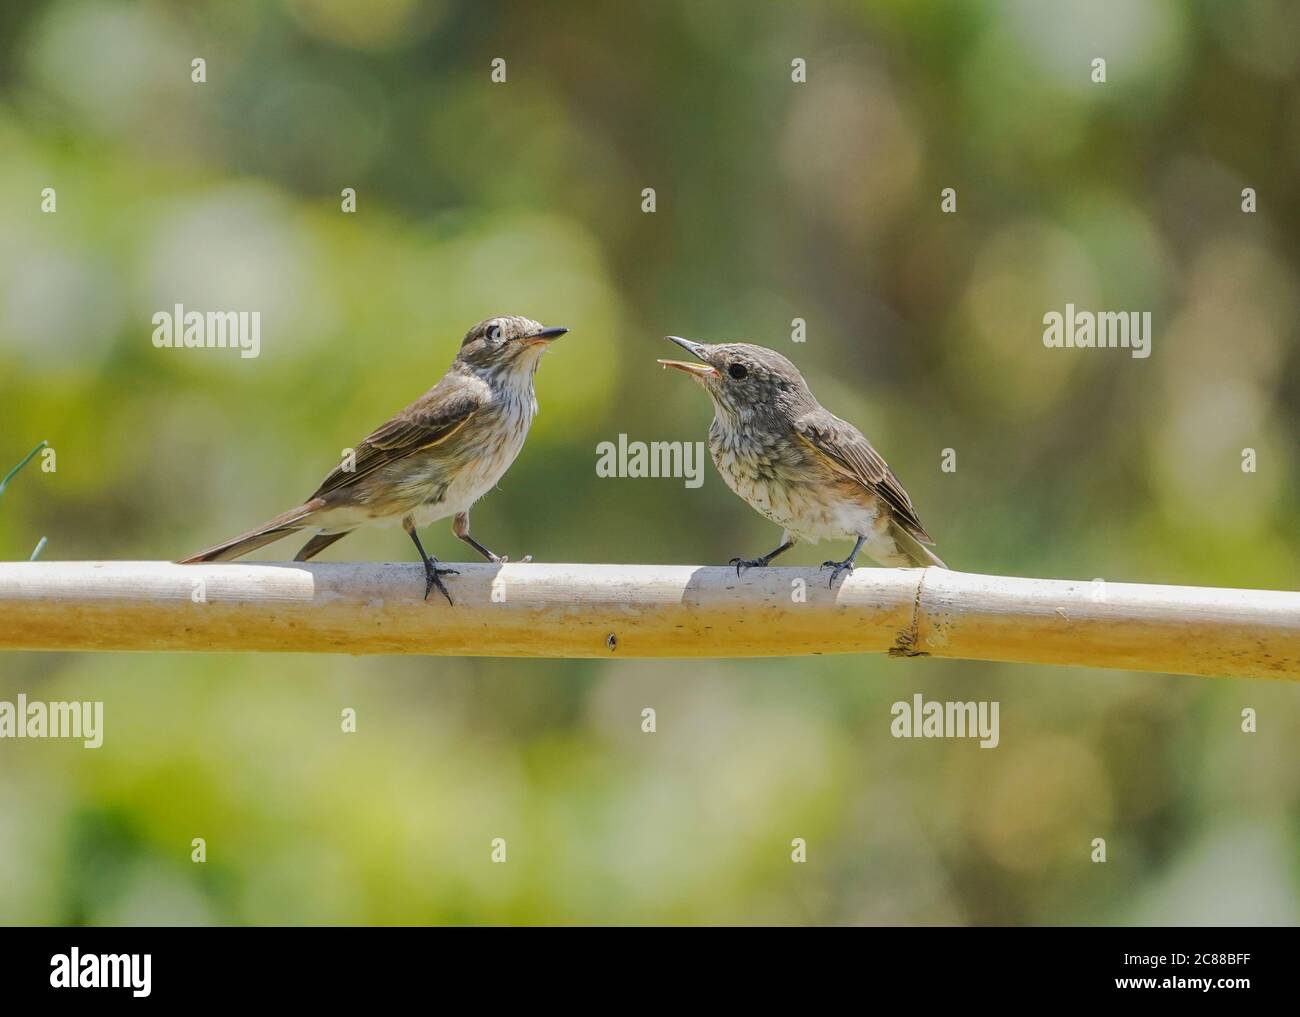 adult Spotted flycatcher feeding a young Spotted flycatcher. birds, Spain. Stock Photo